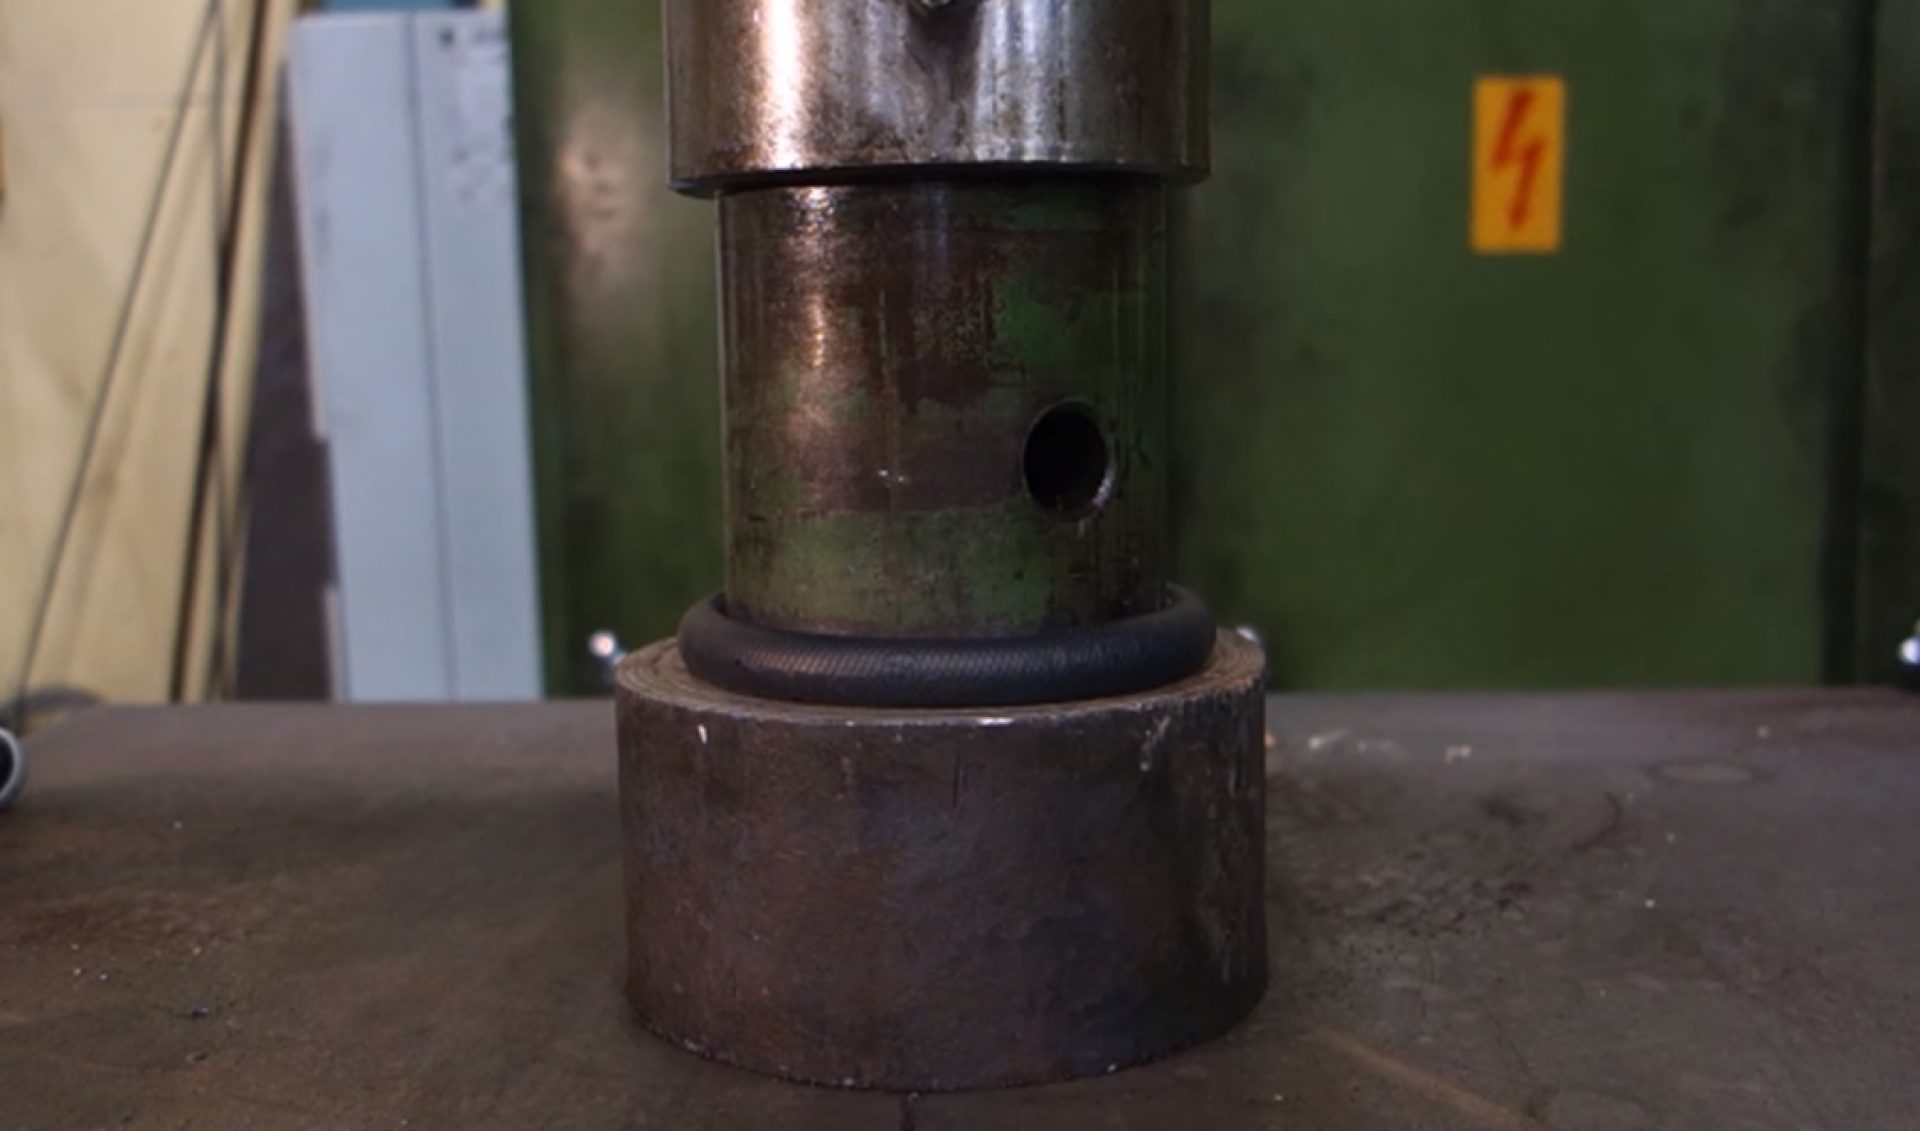 YouTube’s Hydraulic Press Channel Takes Off